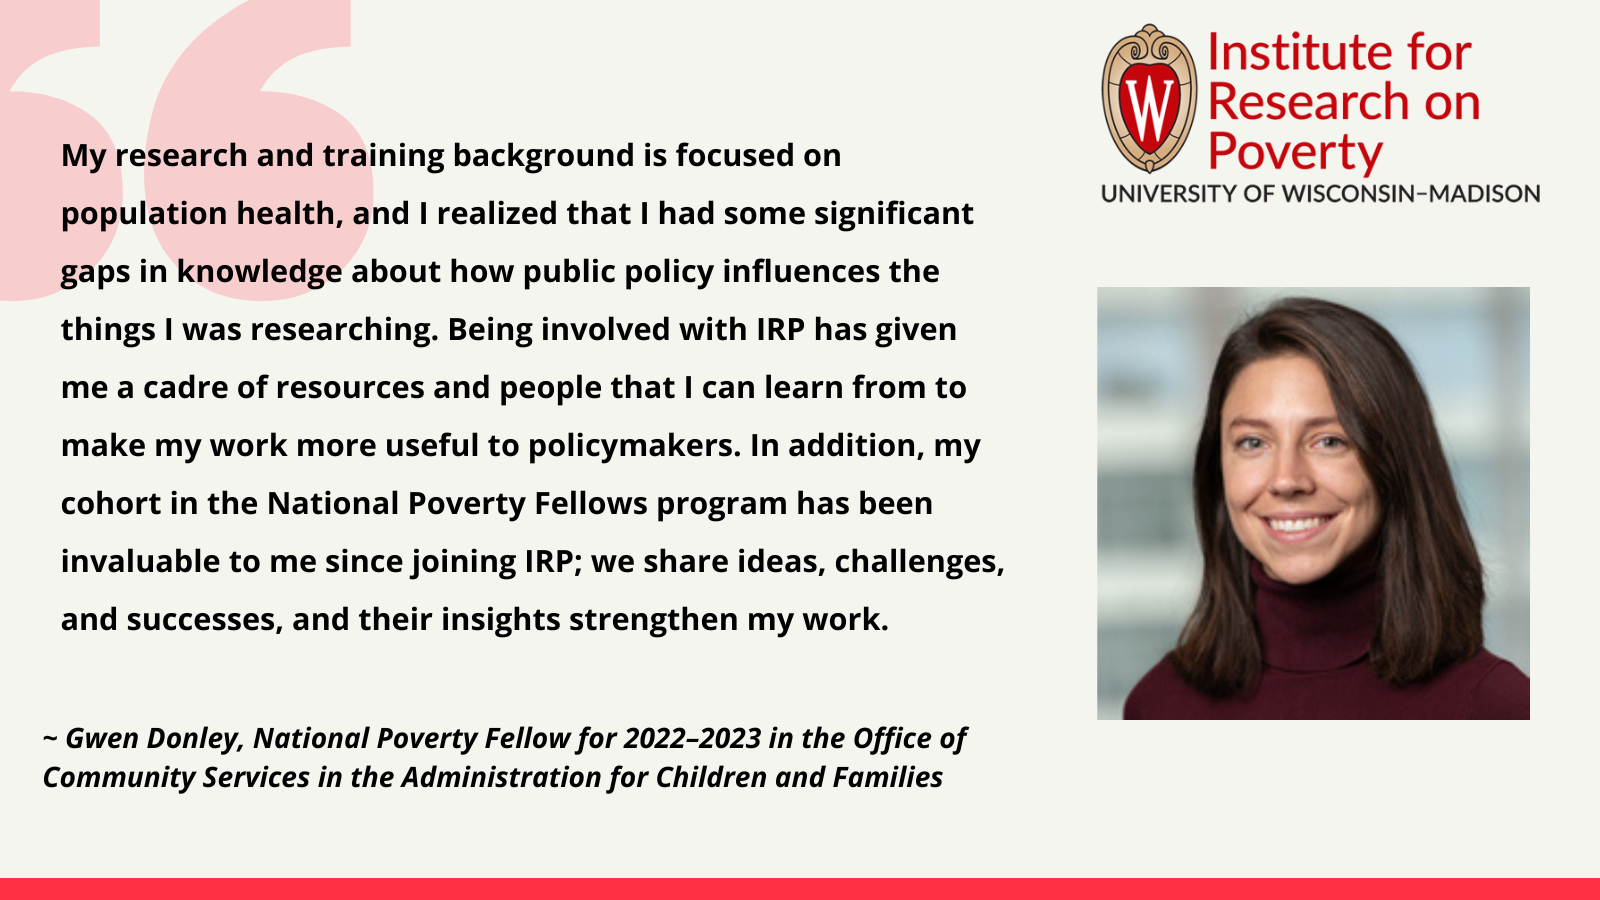 Gwen Donley, National Poverty Fellow for 2022–2023 in the Office of Community Services in the Administration for Children and Families: My research and training background is focused on population health, and I realized that I had some significant gaps in knowledge about how public policy influences the things I was researching. Being involved with IRP has given me a cadre of resources and people that I can learn from to make my work more useful to policymakers. In addition, my cohort in the National Poverty Fellows program has been invaluable to me since joining IRP; we share ideas, challenges, and successes, and their insights strengthen my work.